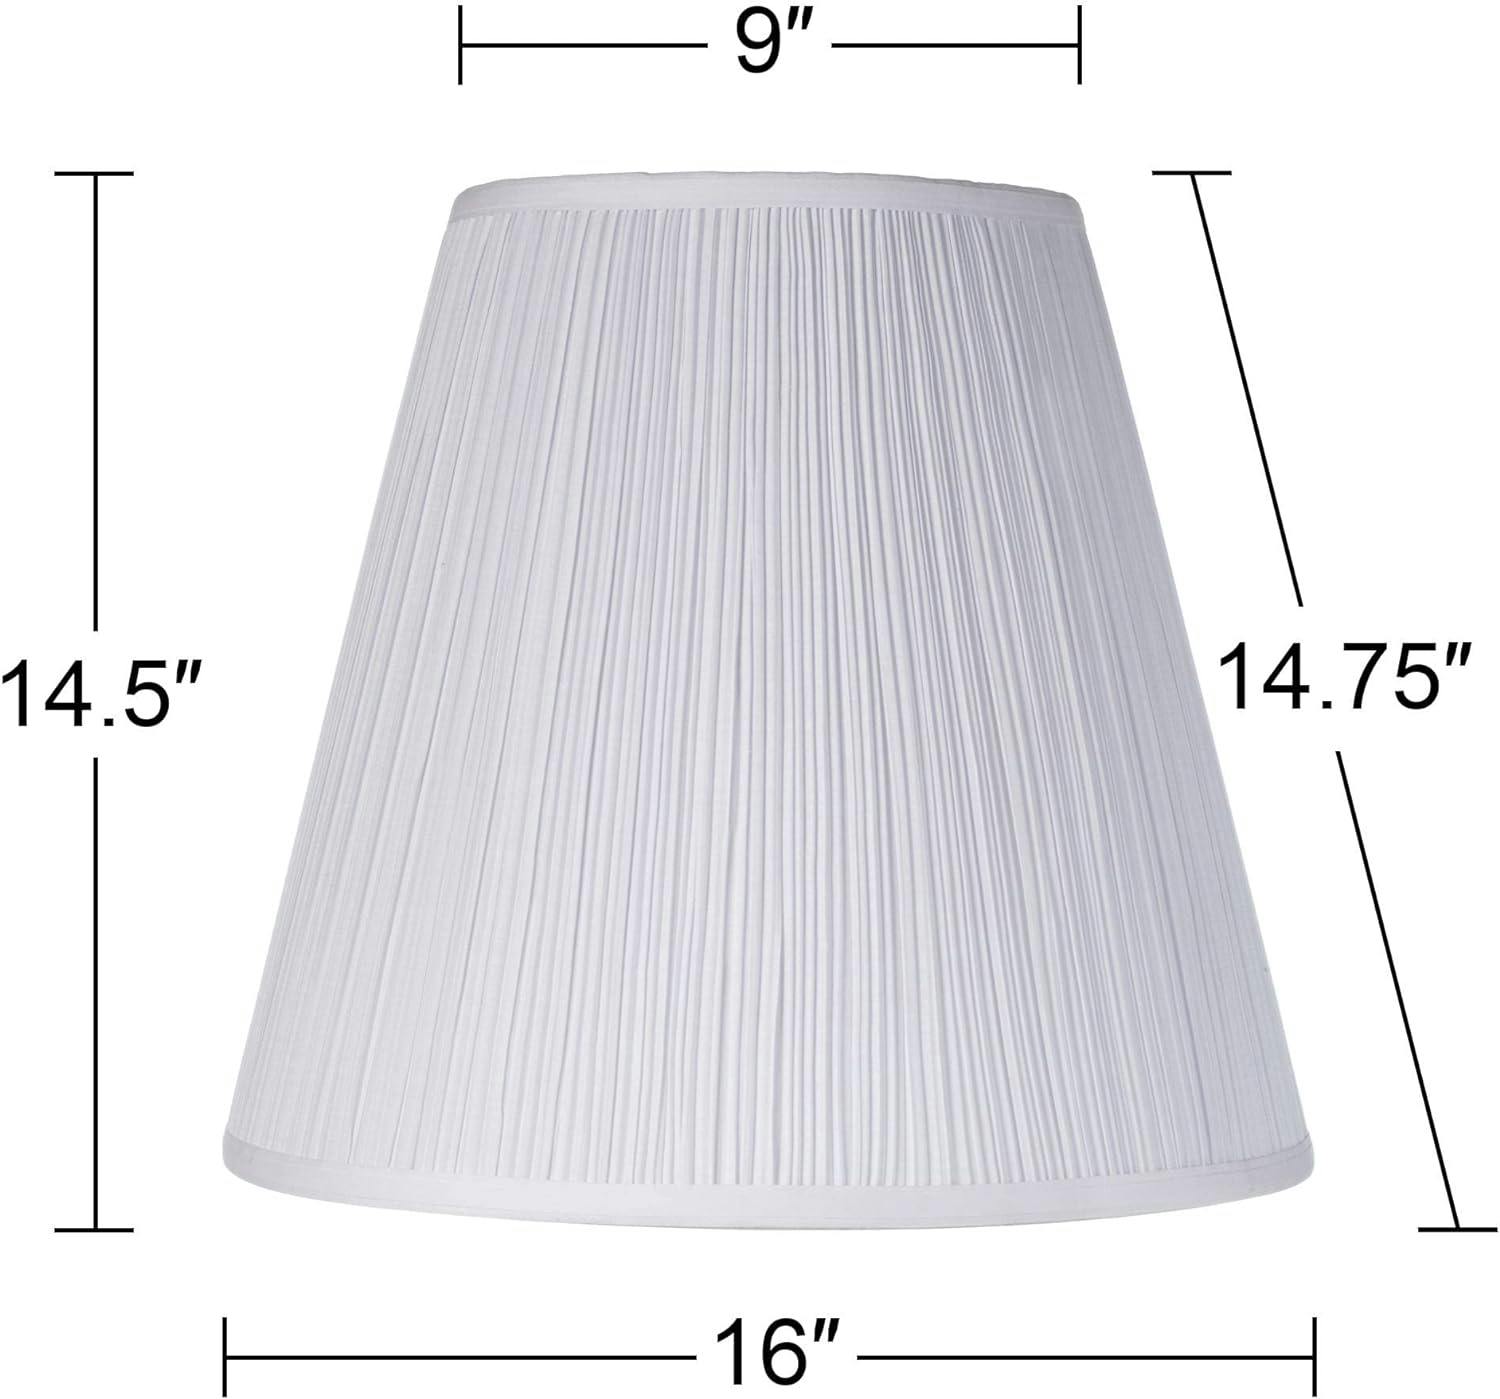 Set of 2 Traditional White Pleated Empire Lamp Shades 9"x16"